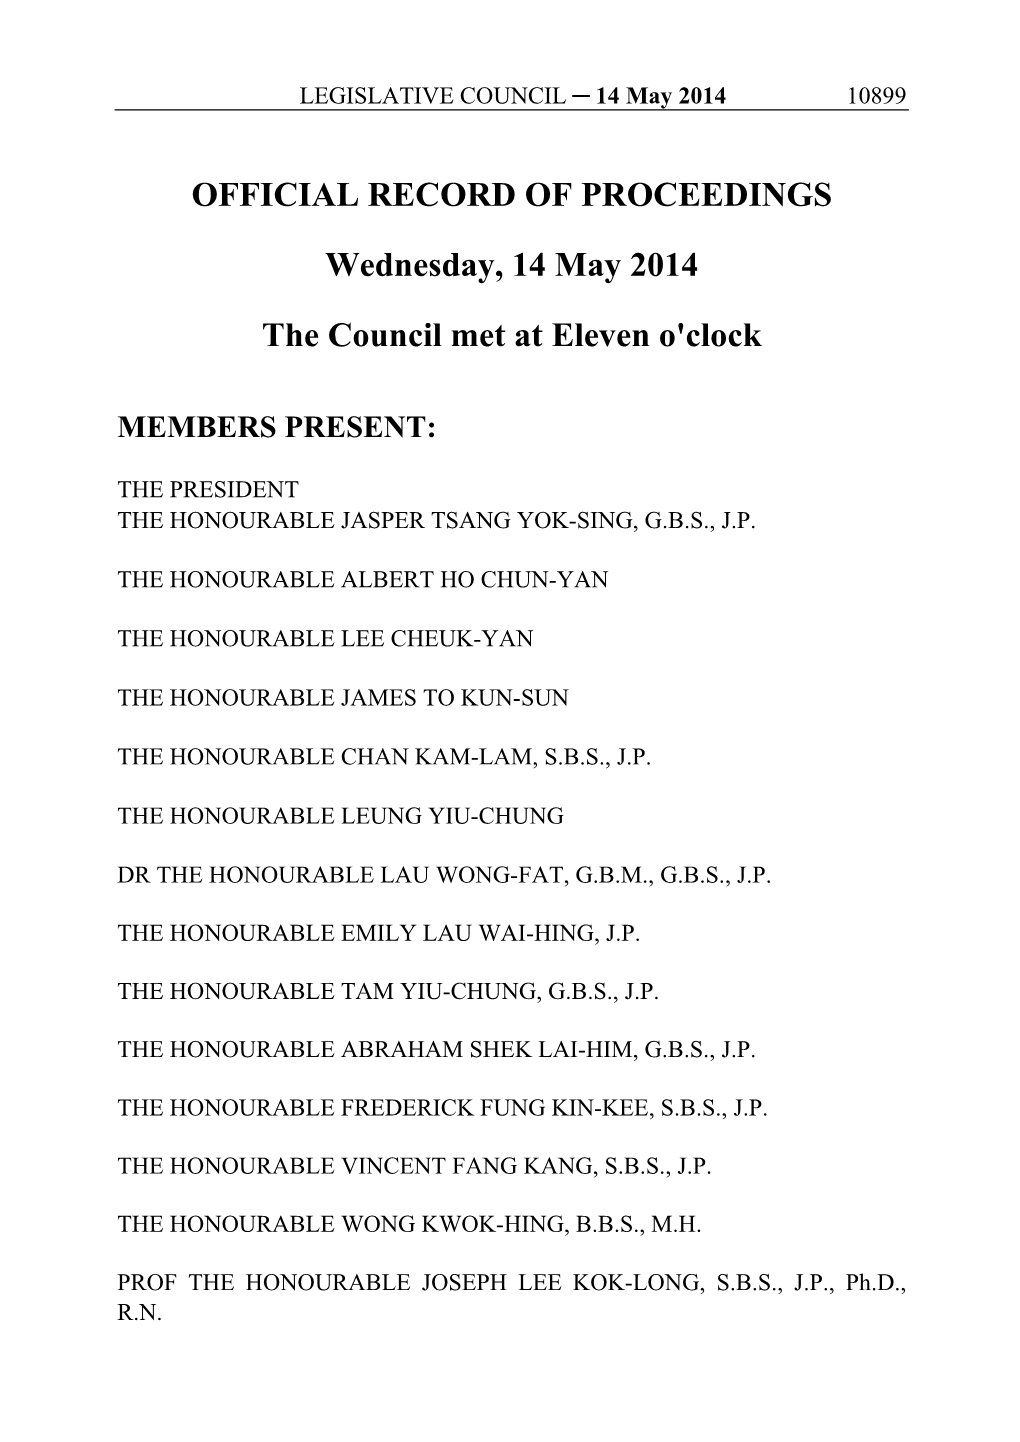 OFFICIAL RECORD of PROCEEDINGS Wednesday, 14 May 2014 the Council Met at Eleven O'clock